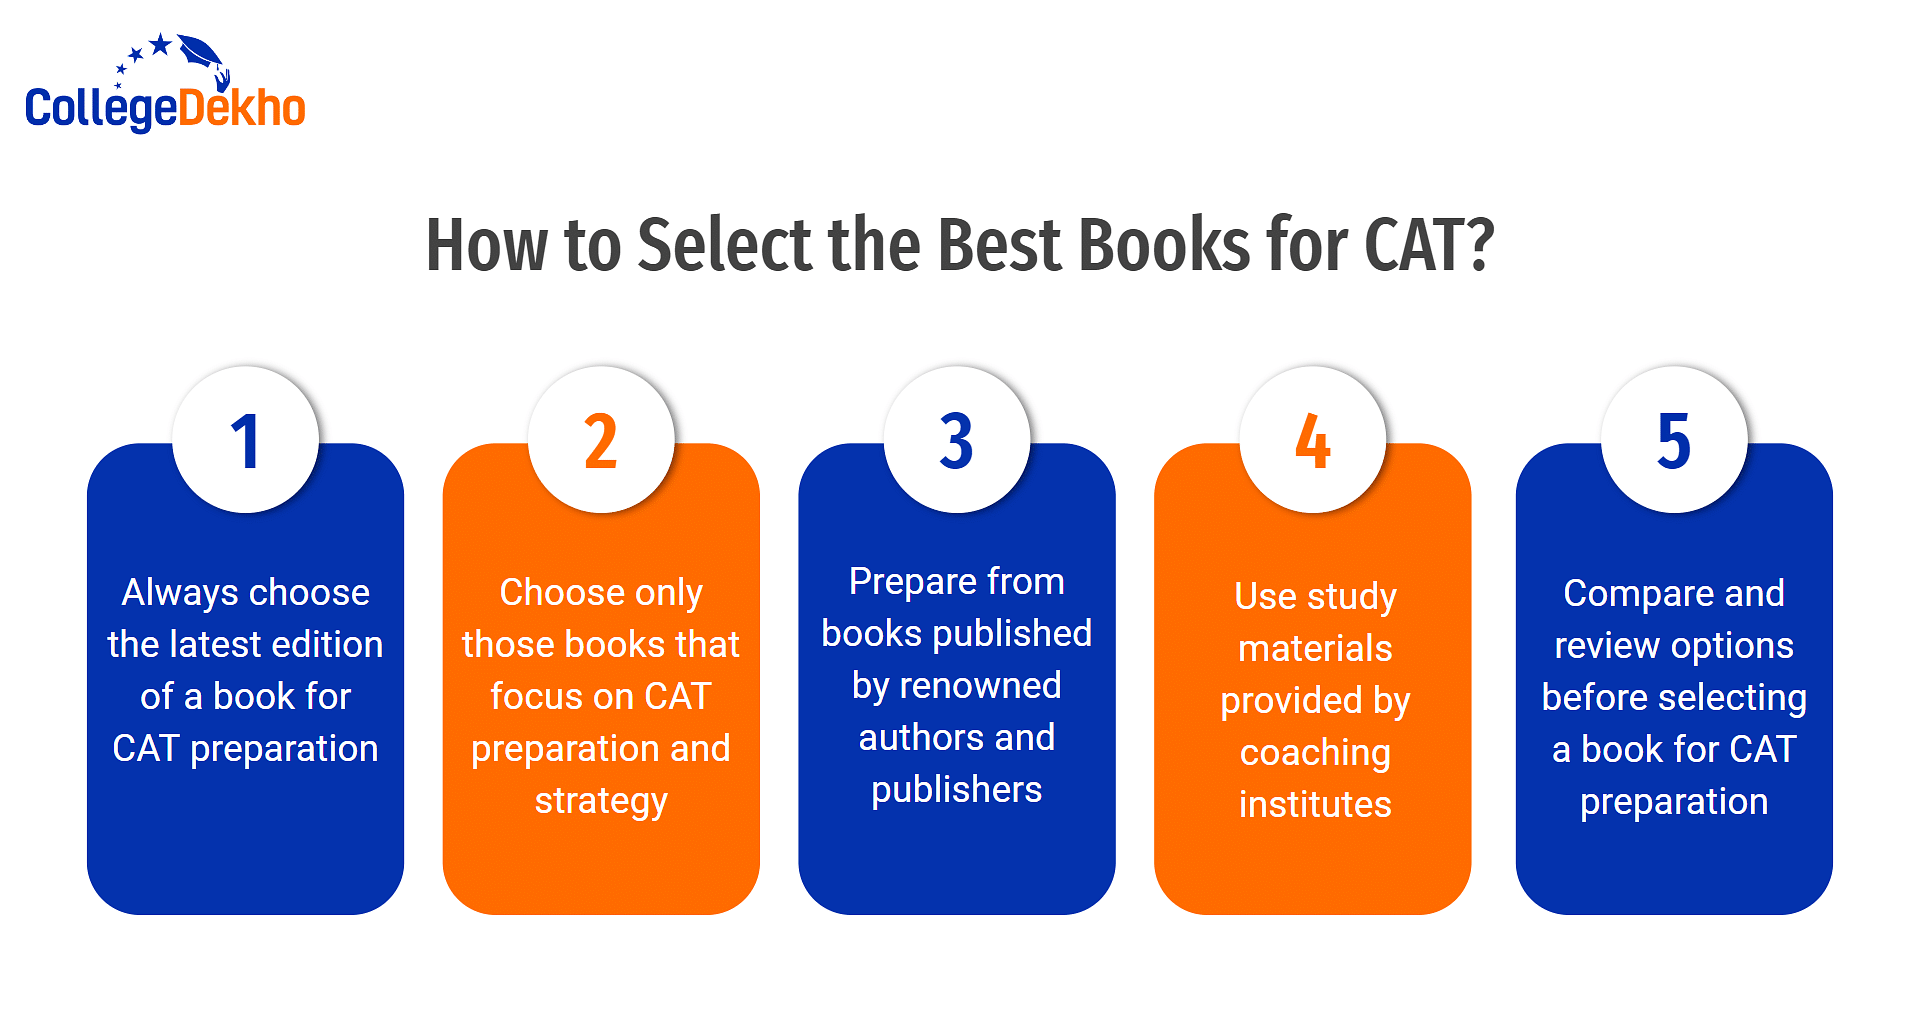 How to Select the Best Books for CAT